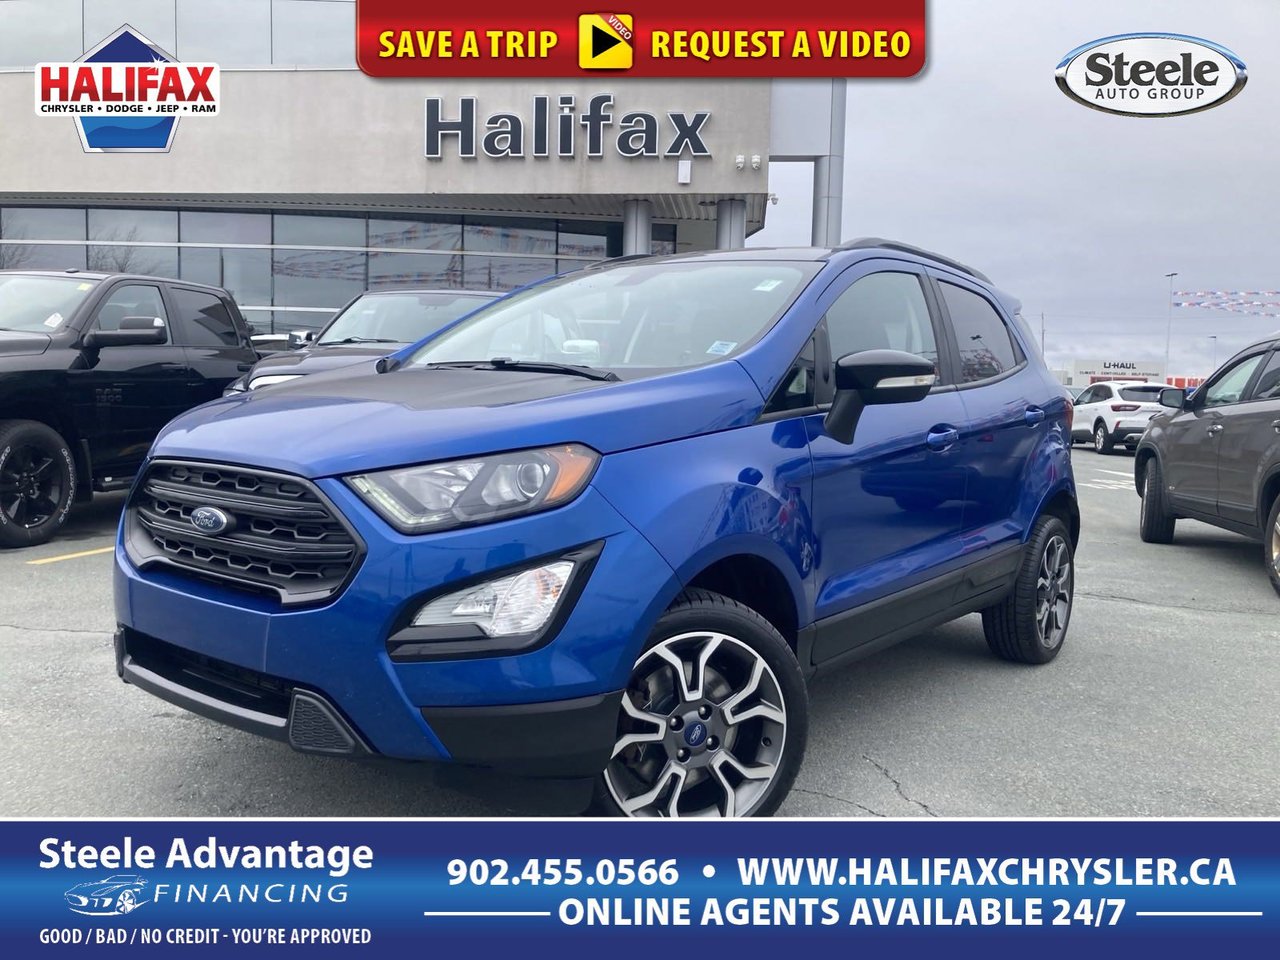 2019 Ford EcoSport SES - 4WD, NAV, HEATED LEATHER TRIMMED SEATS, SAFETY FEATURES,-0